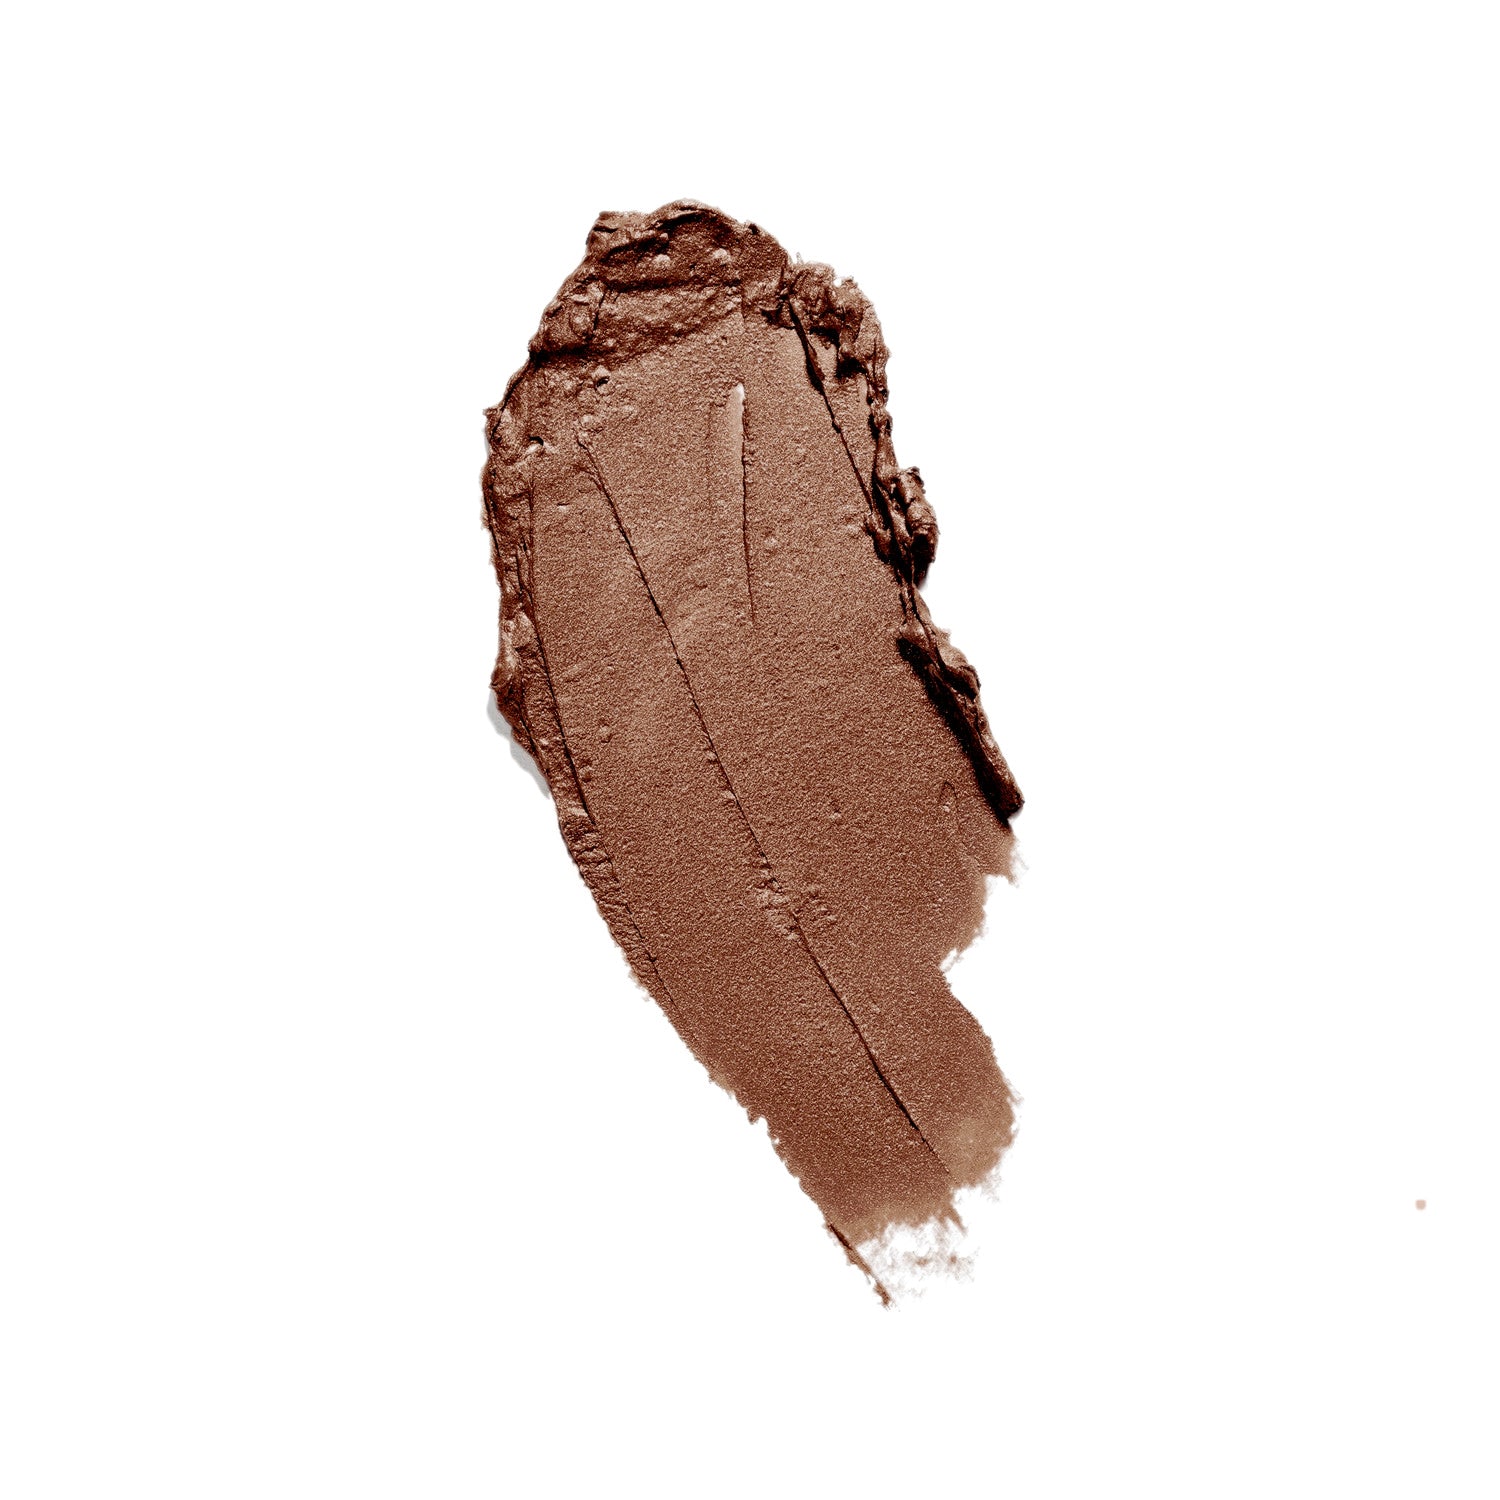 Satin bronze lipstick from Natural-Cruelty-Free collection on a white backdrop